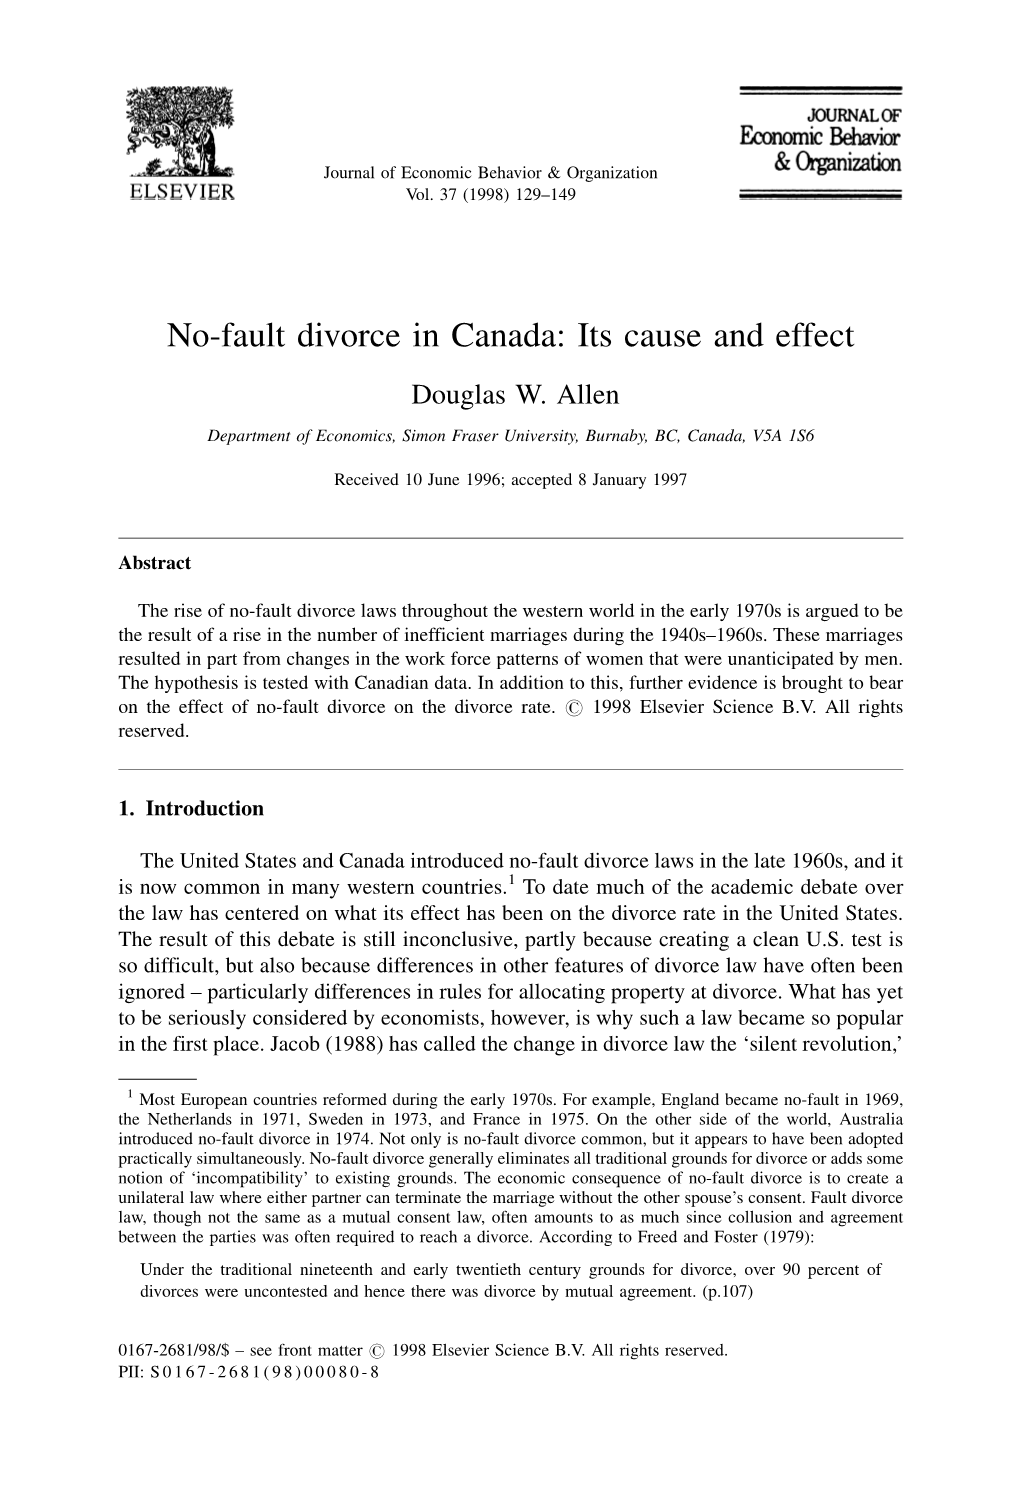 No-Fault Divorce in Canada: Its Cause and Effect